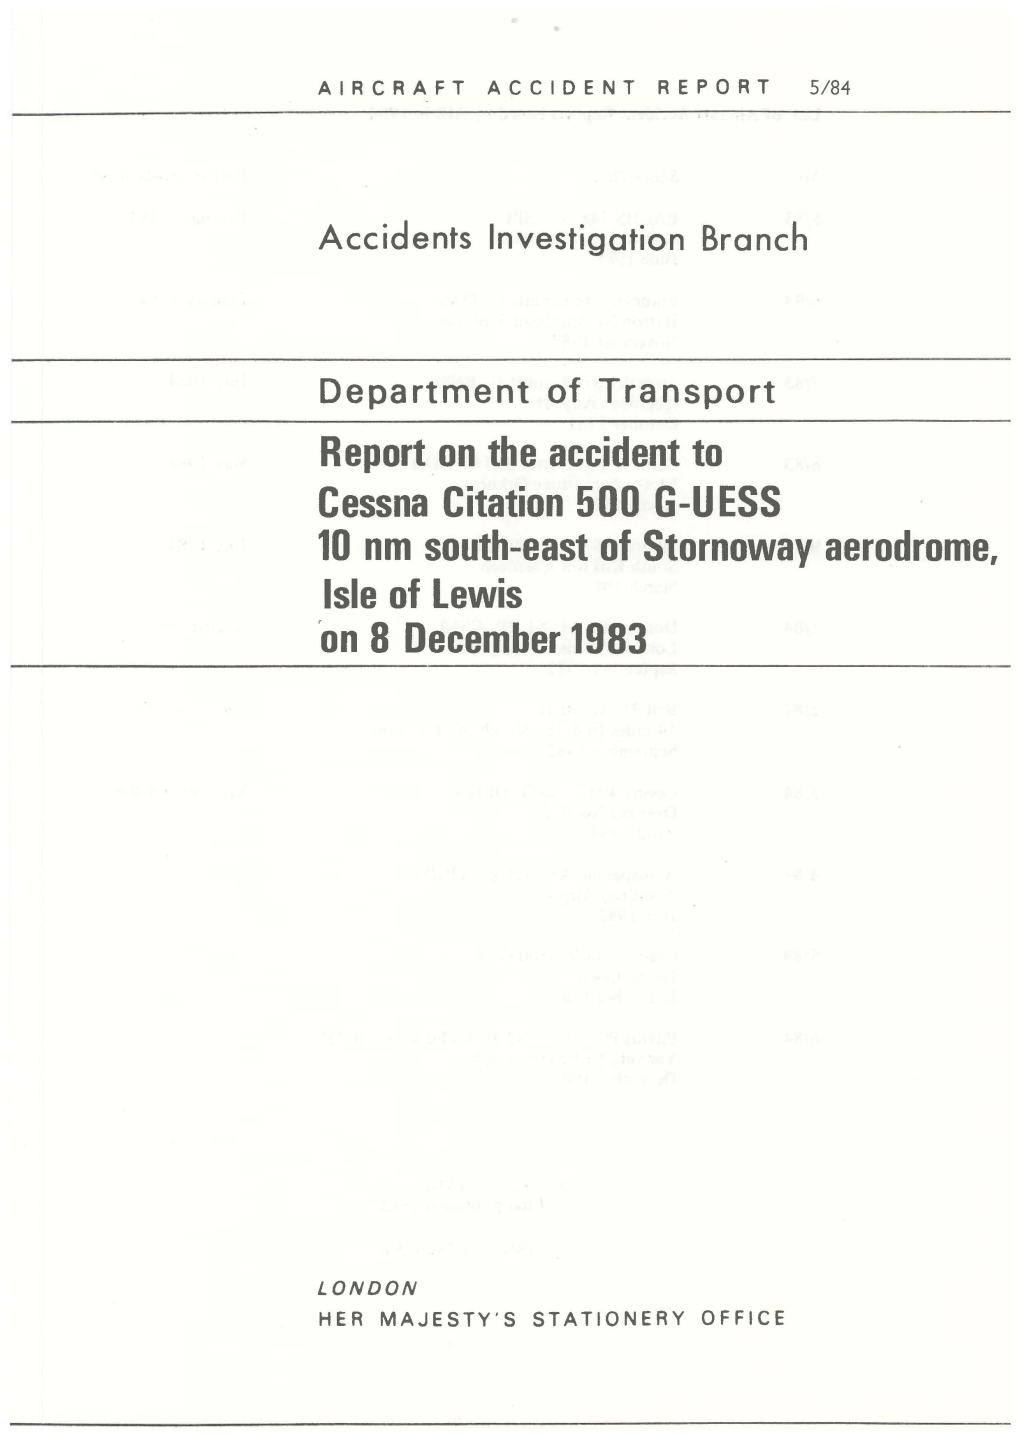 Report on the Accident to Cessna Citation 500 G-U ESS 10 Nm South-East of Stornoway Aerodrome, Isle of Lewis 'On 8 December 1983